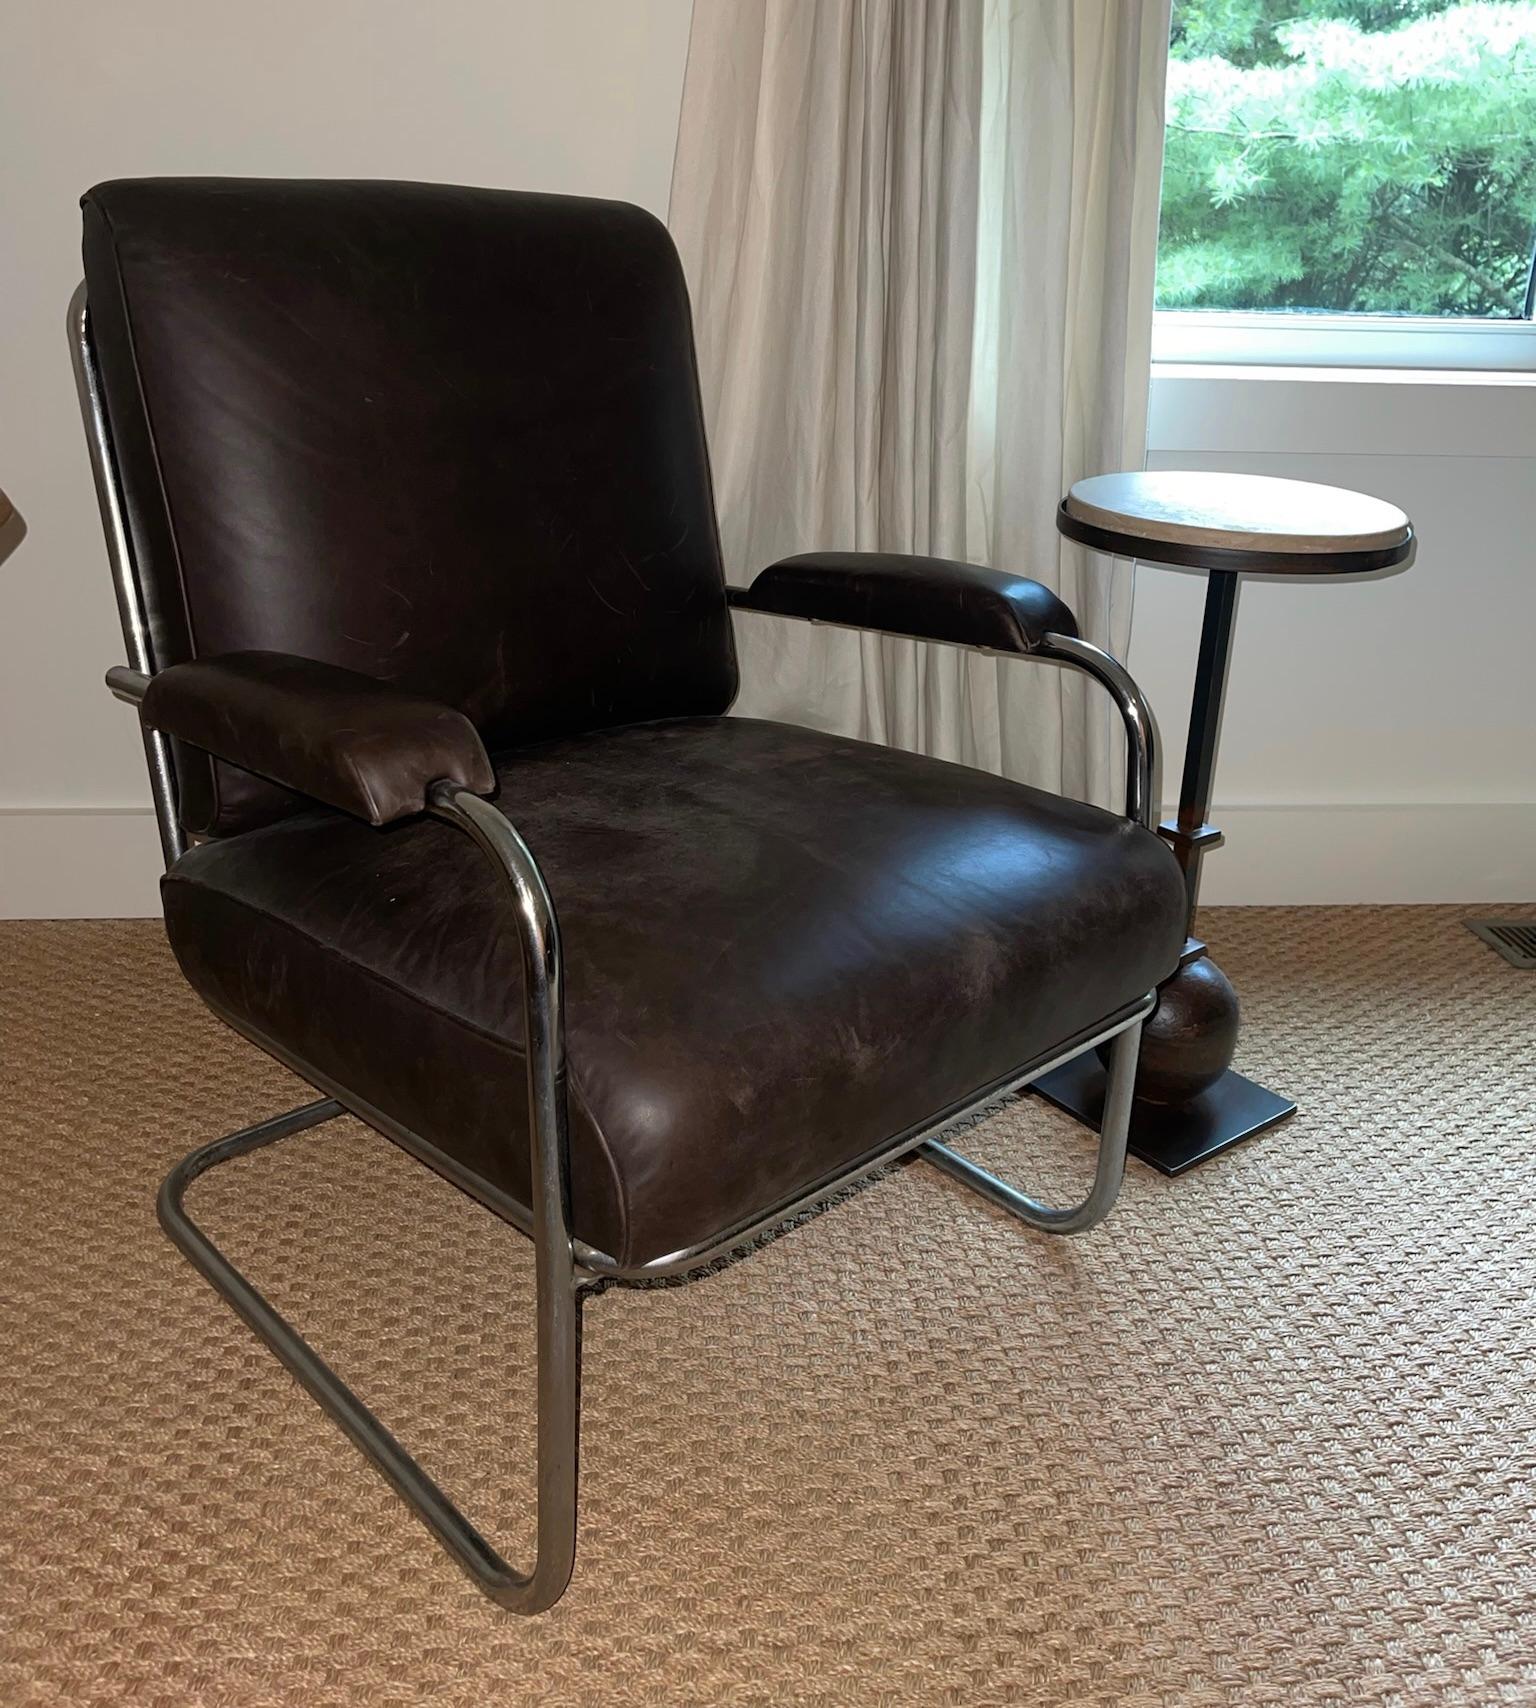 Vintage chair made of a tubular chrome base and dark brown leather upholstery.